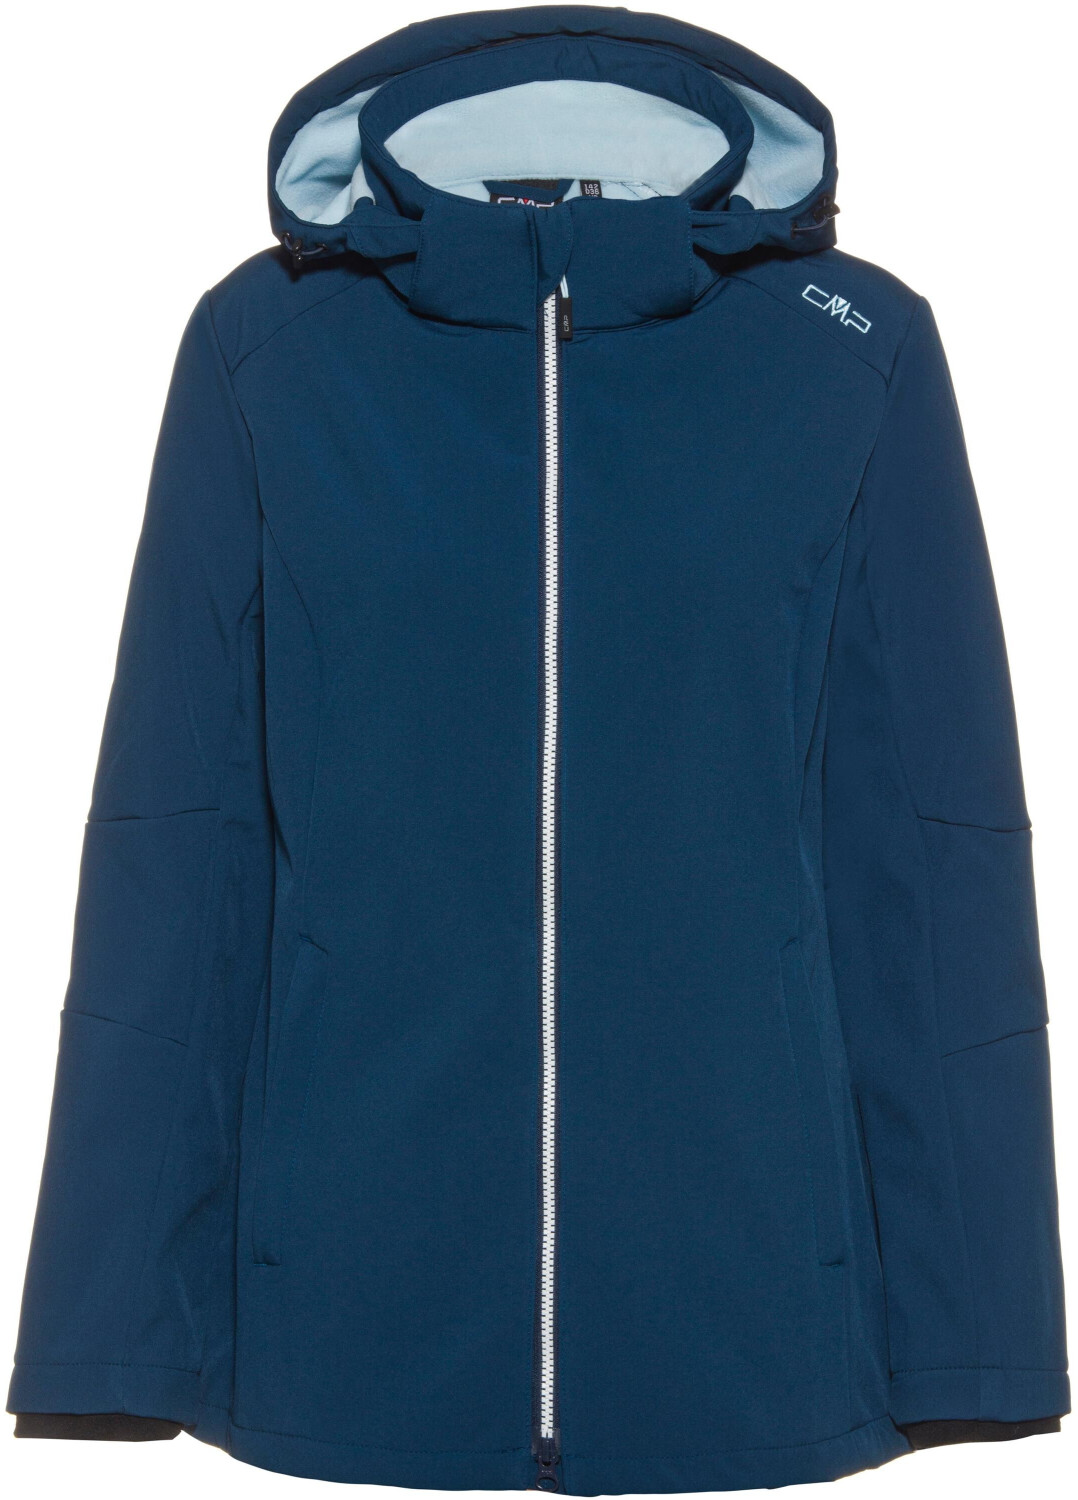 CMP Woman Softshell blue ink/cristal Jacket Preisvergleich | Long Comfortable 39,99 Fit € With blue (3A22226) bei ab